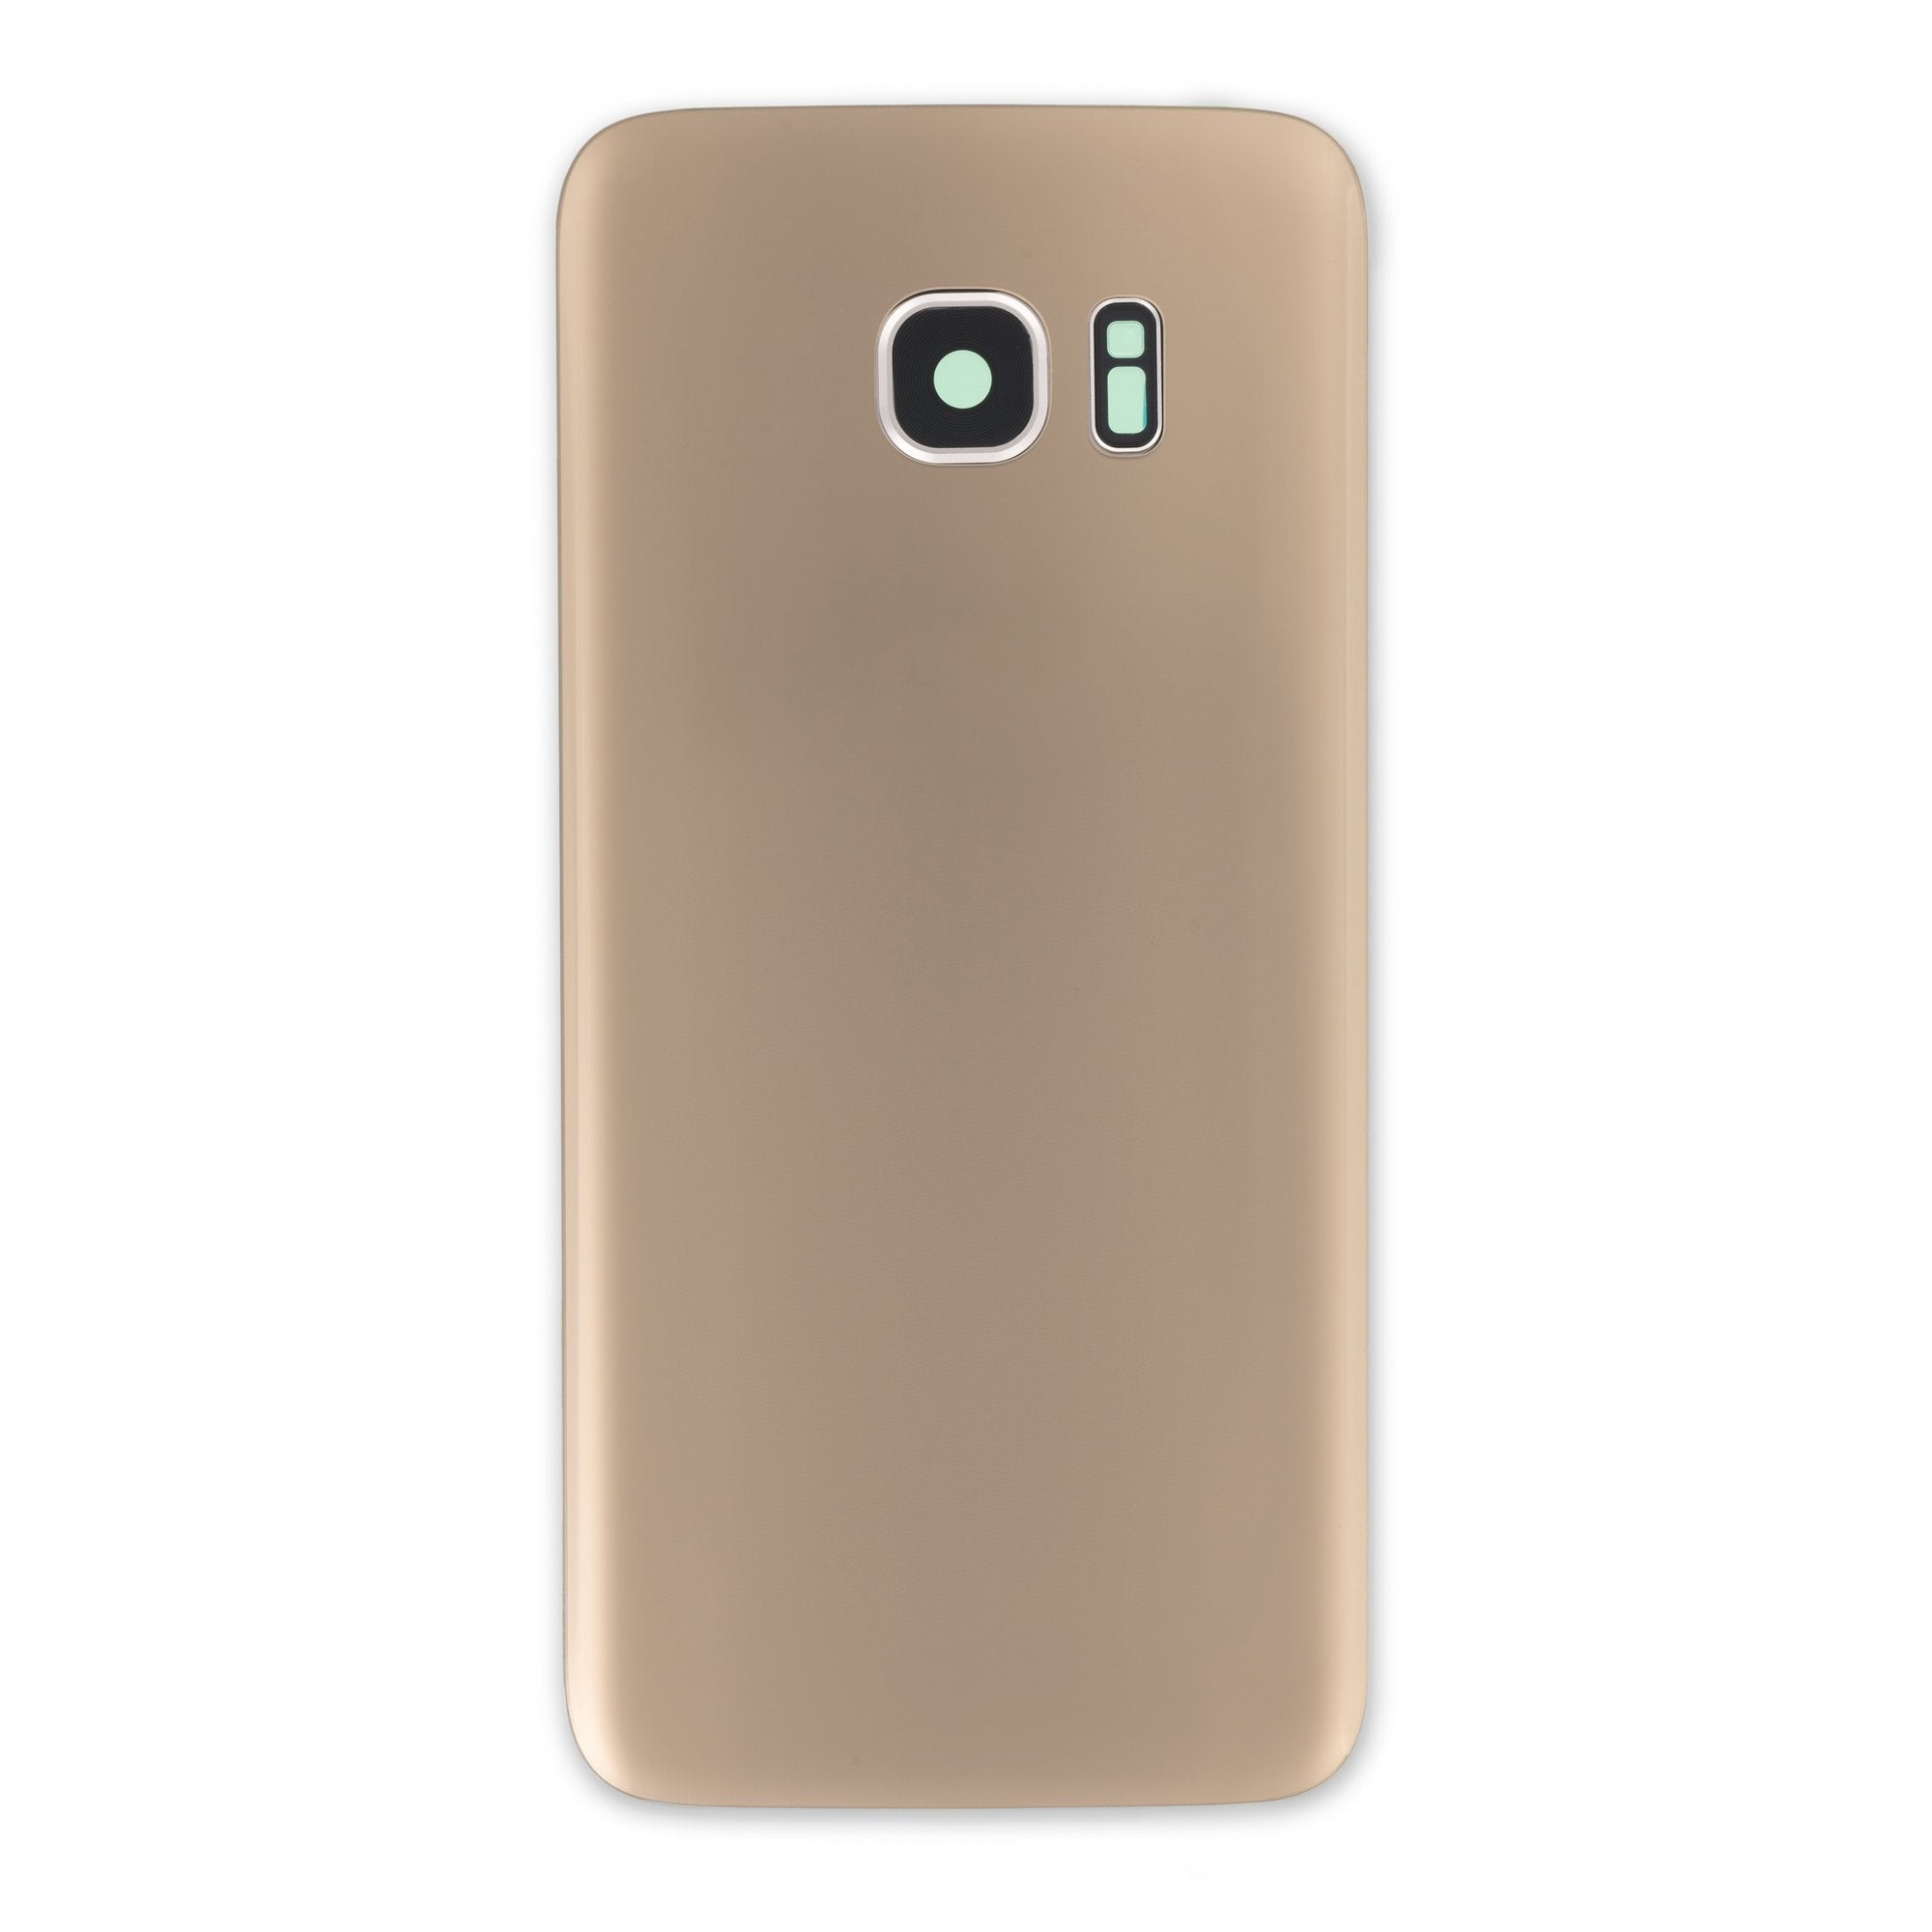 Galaxy S7 Edge Rear Panel/Cover Gold New Part Only